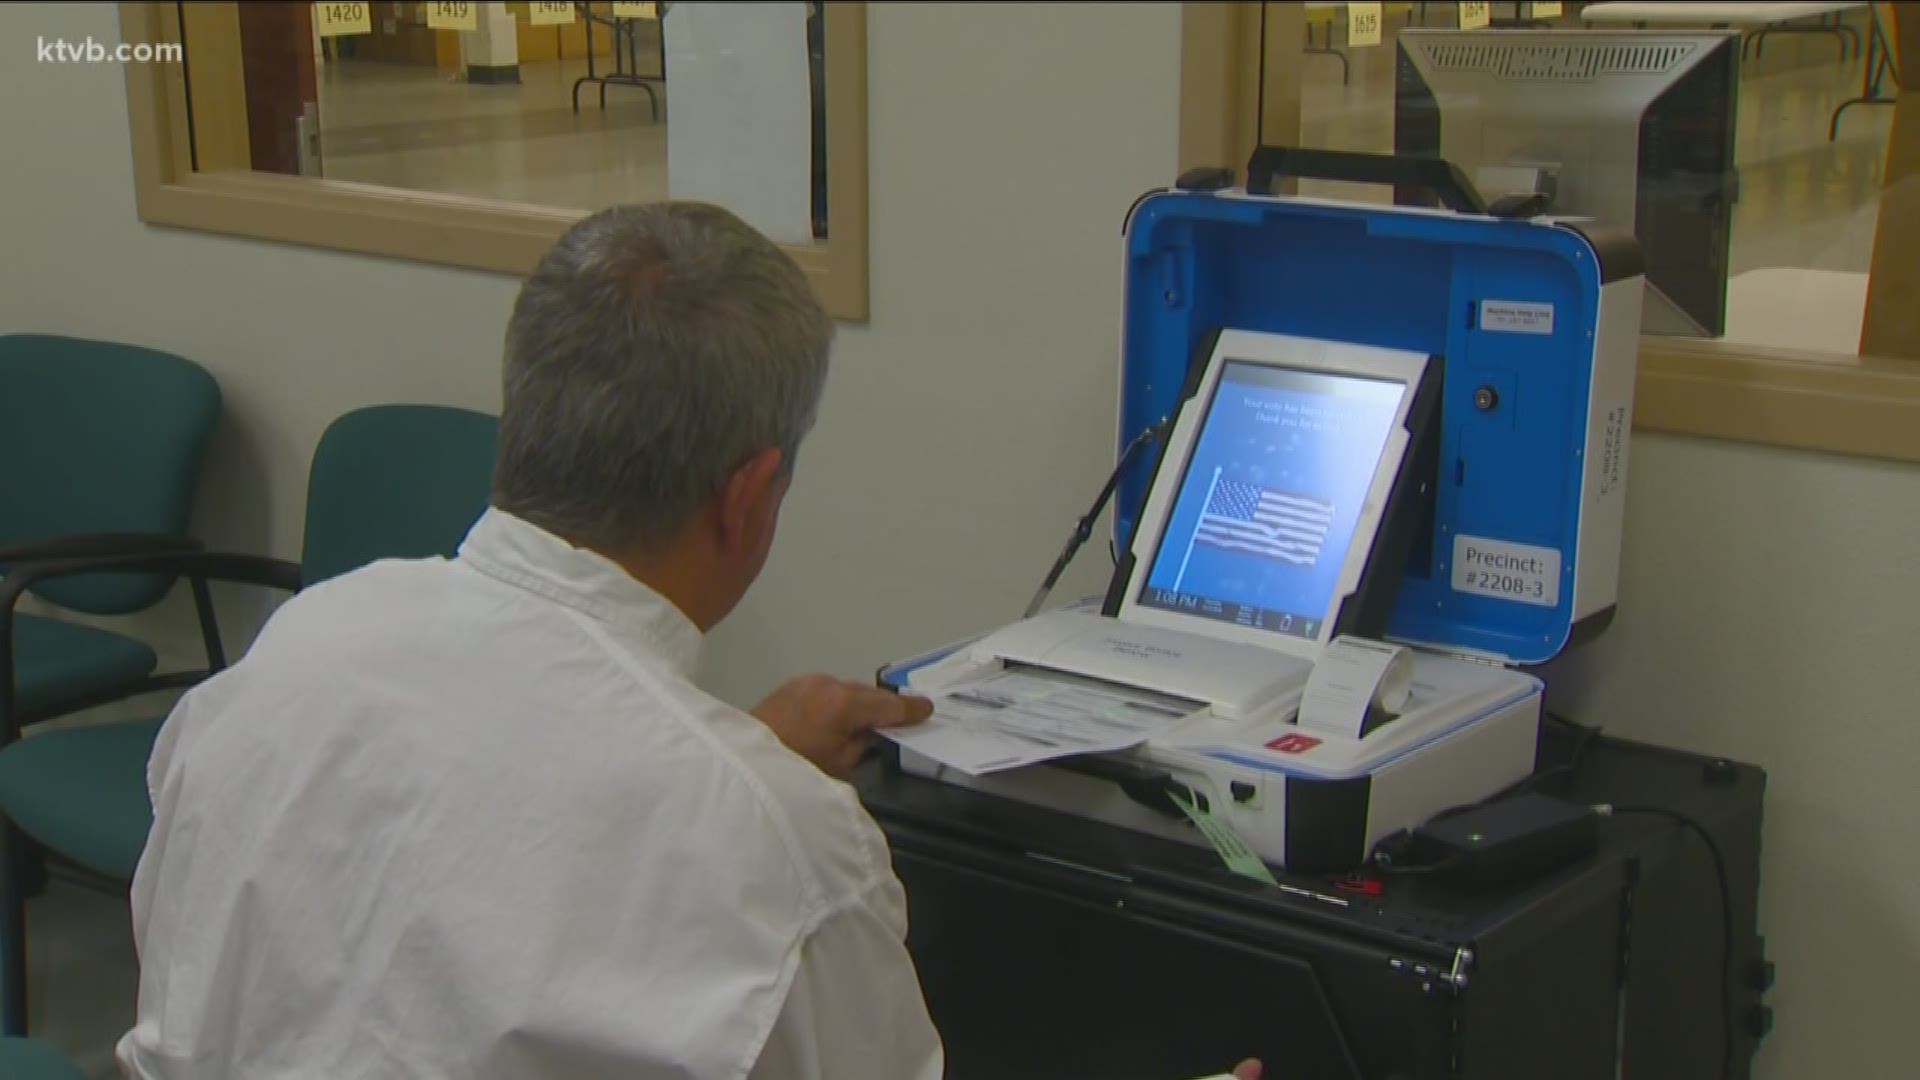 They conducted a final test to give the public confidence before counting all the votes.